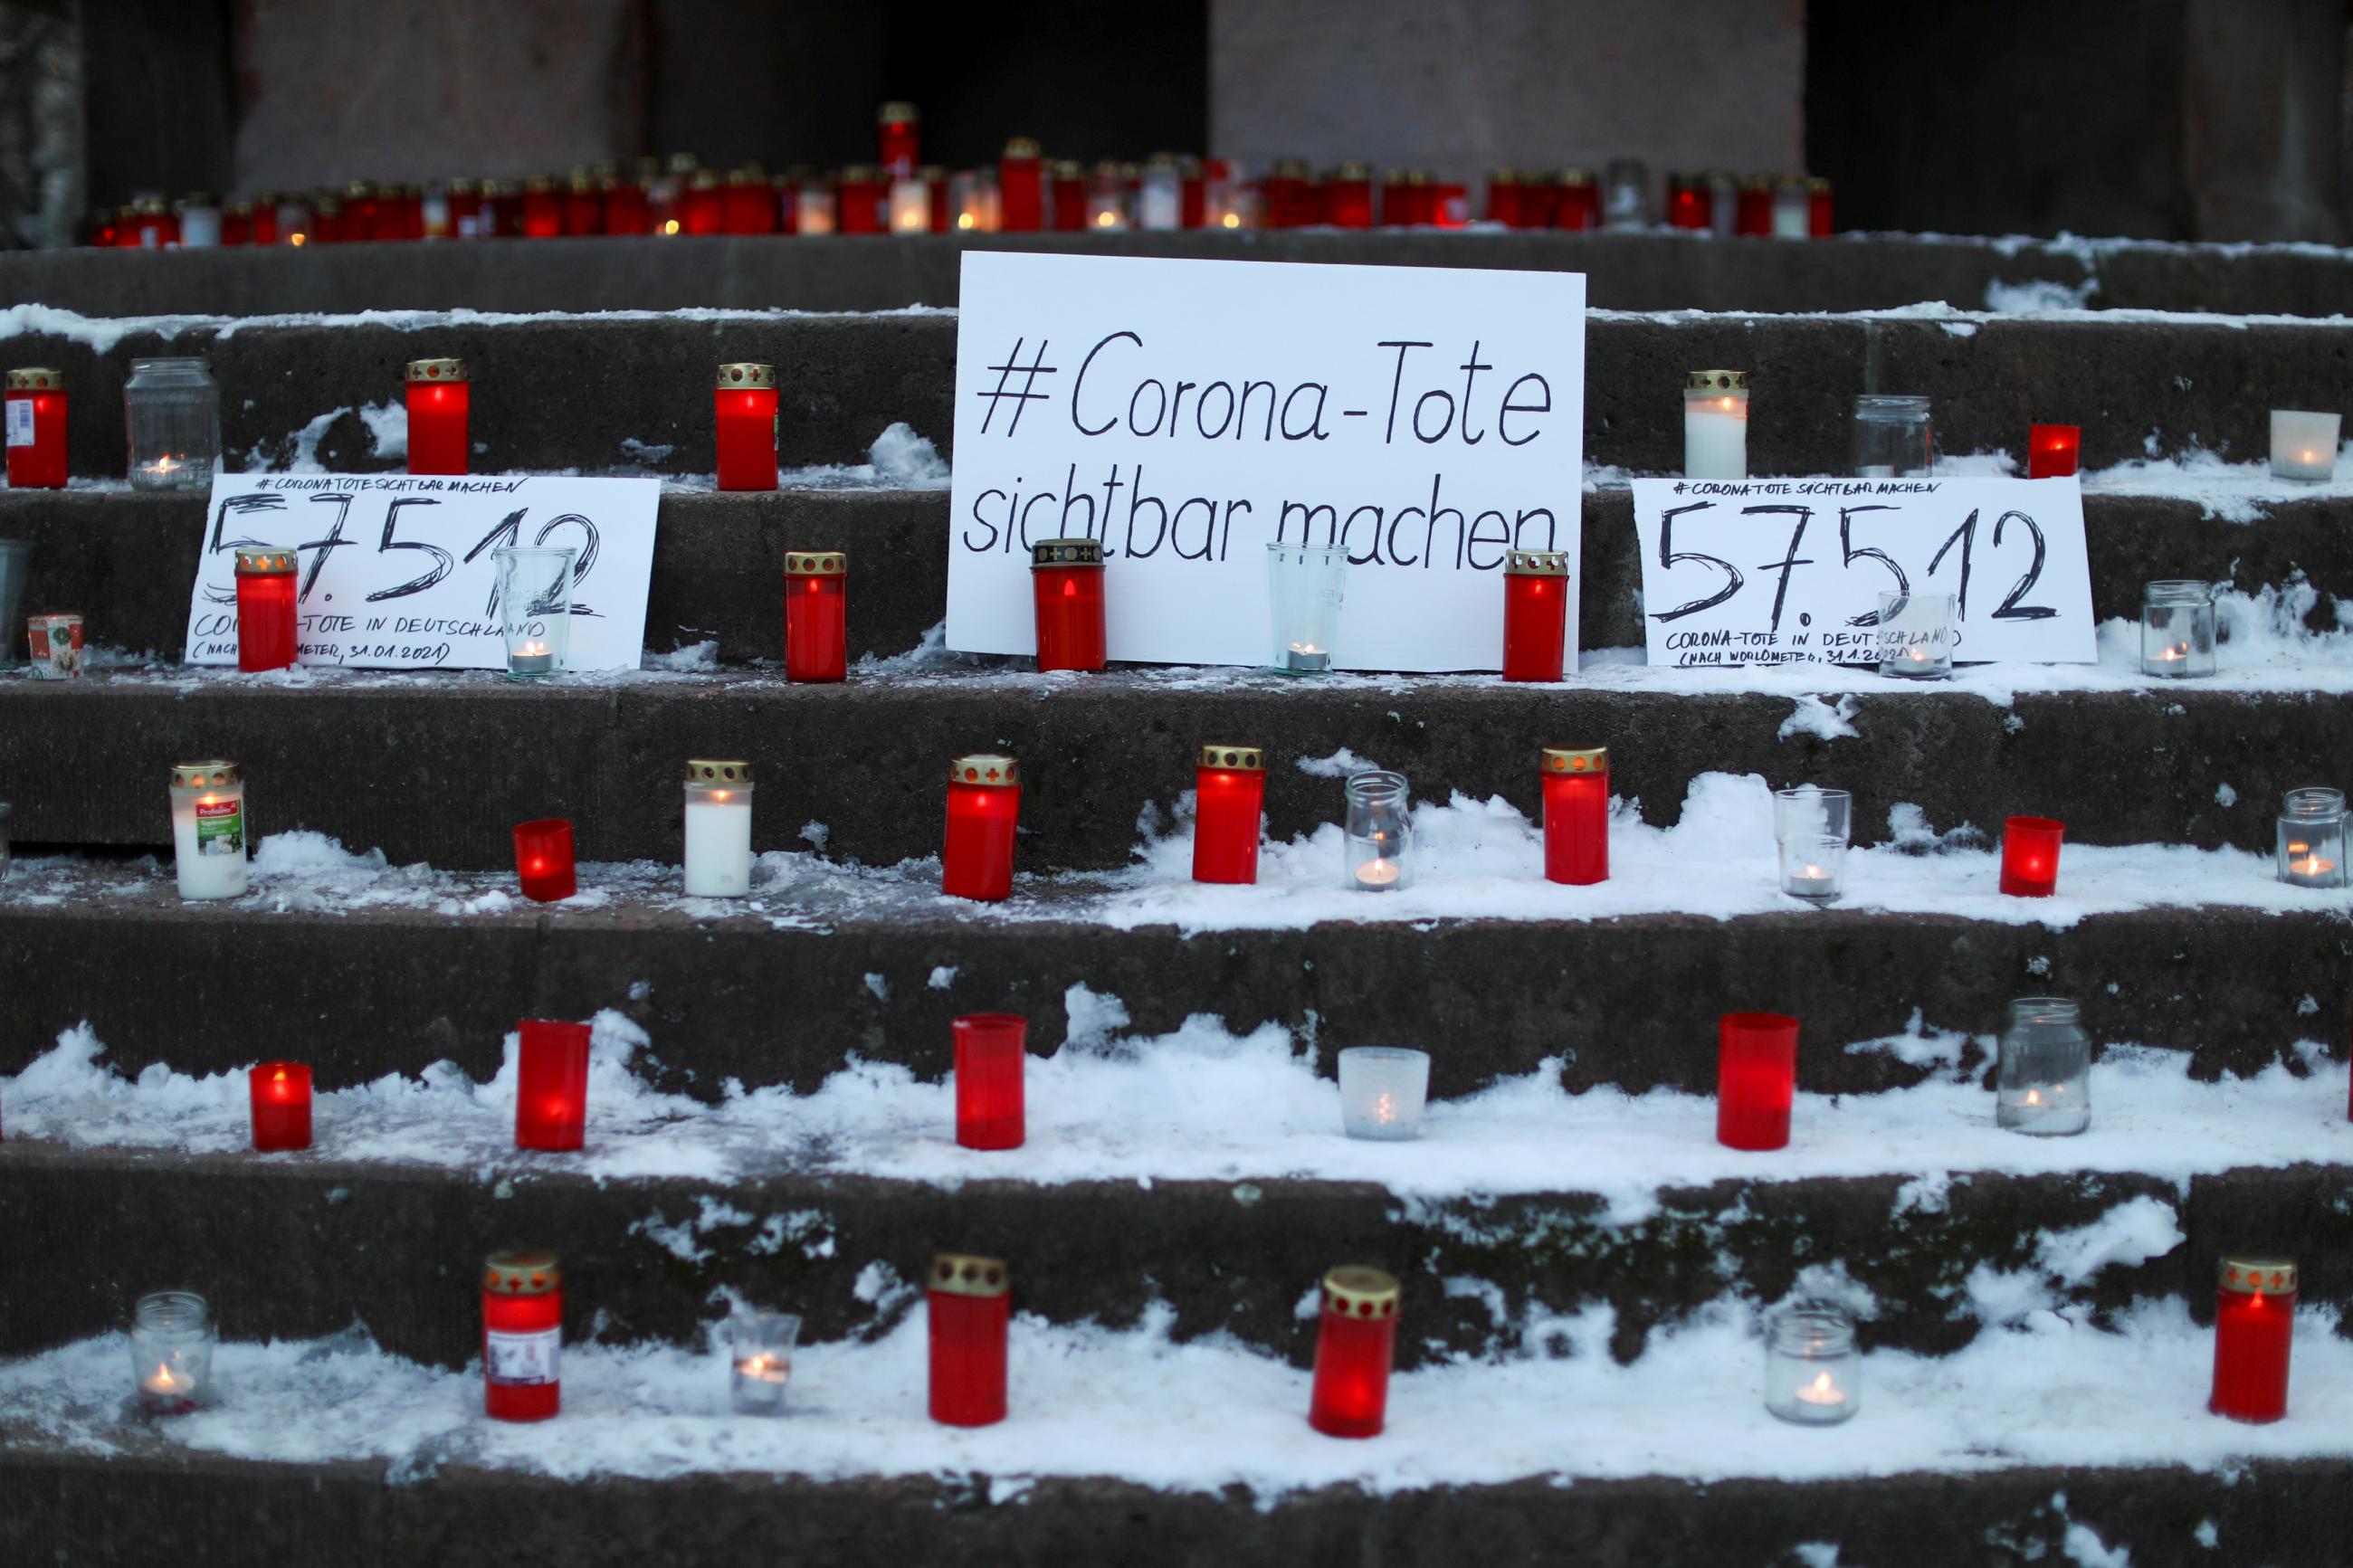 A sign reading "make the corona deaths visible" is pictured during a vigil organised by activist-group #wirgebendenToteneinGesicht (We give a face to the dead) to commemorate the people who died due to the coronavirus disease (COVID-19), in Berlin, Germany, January 31, 2021